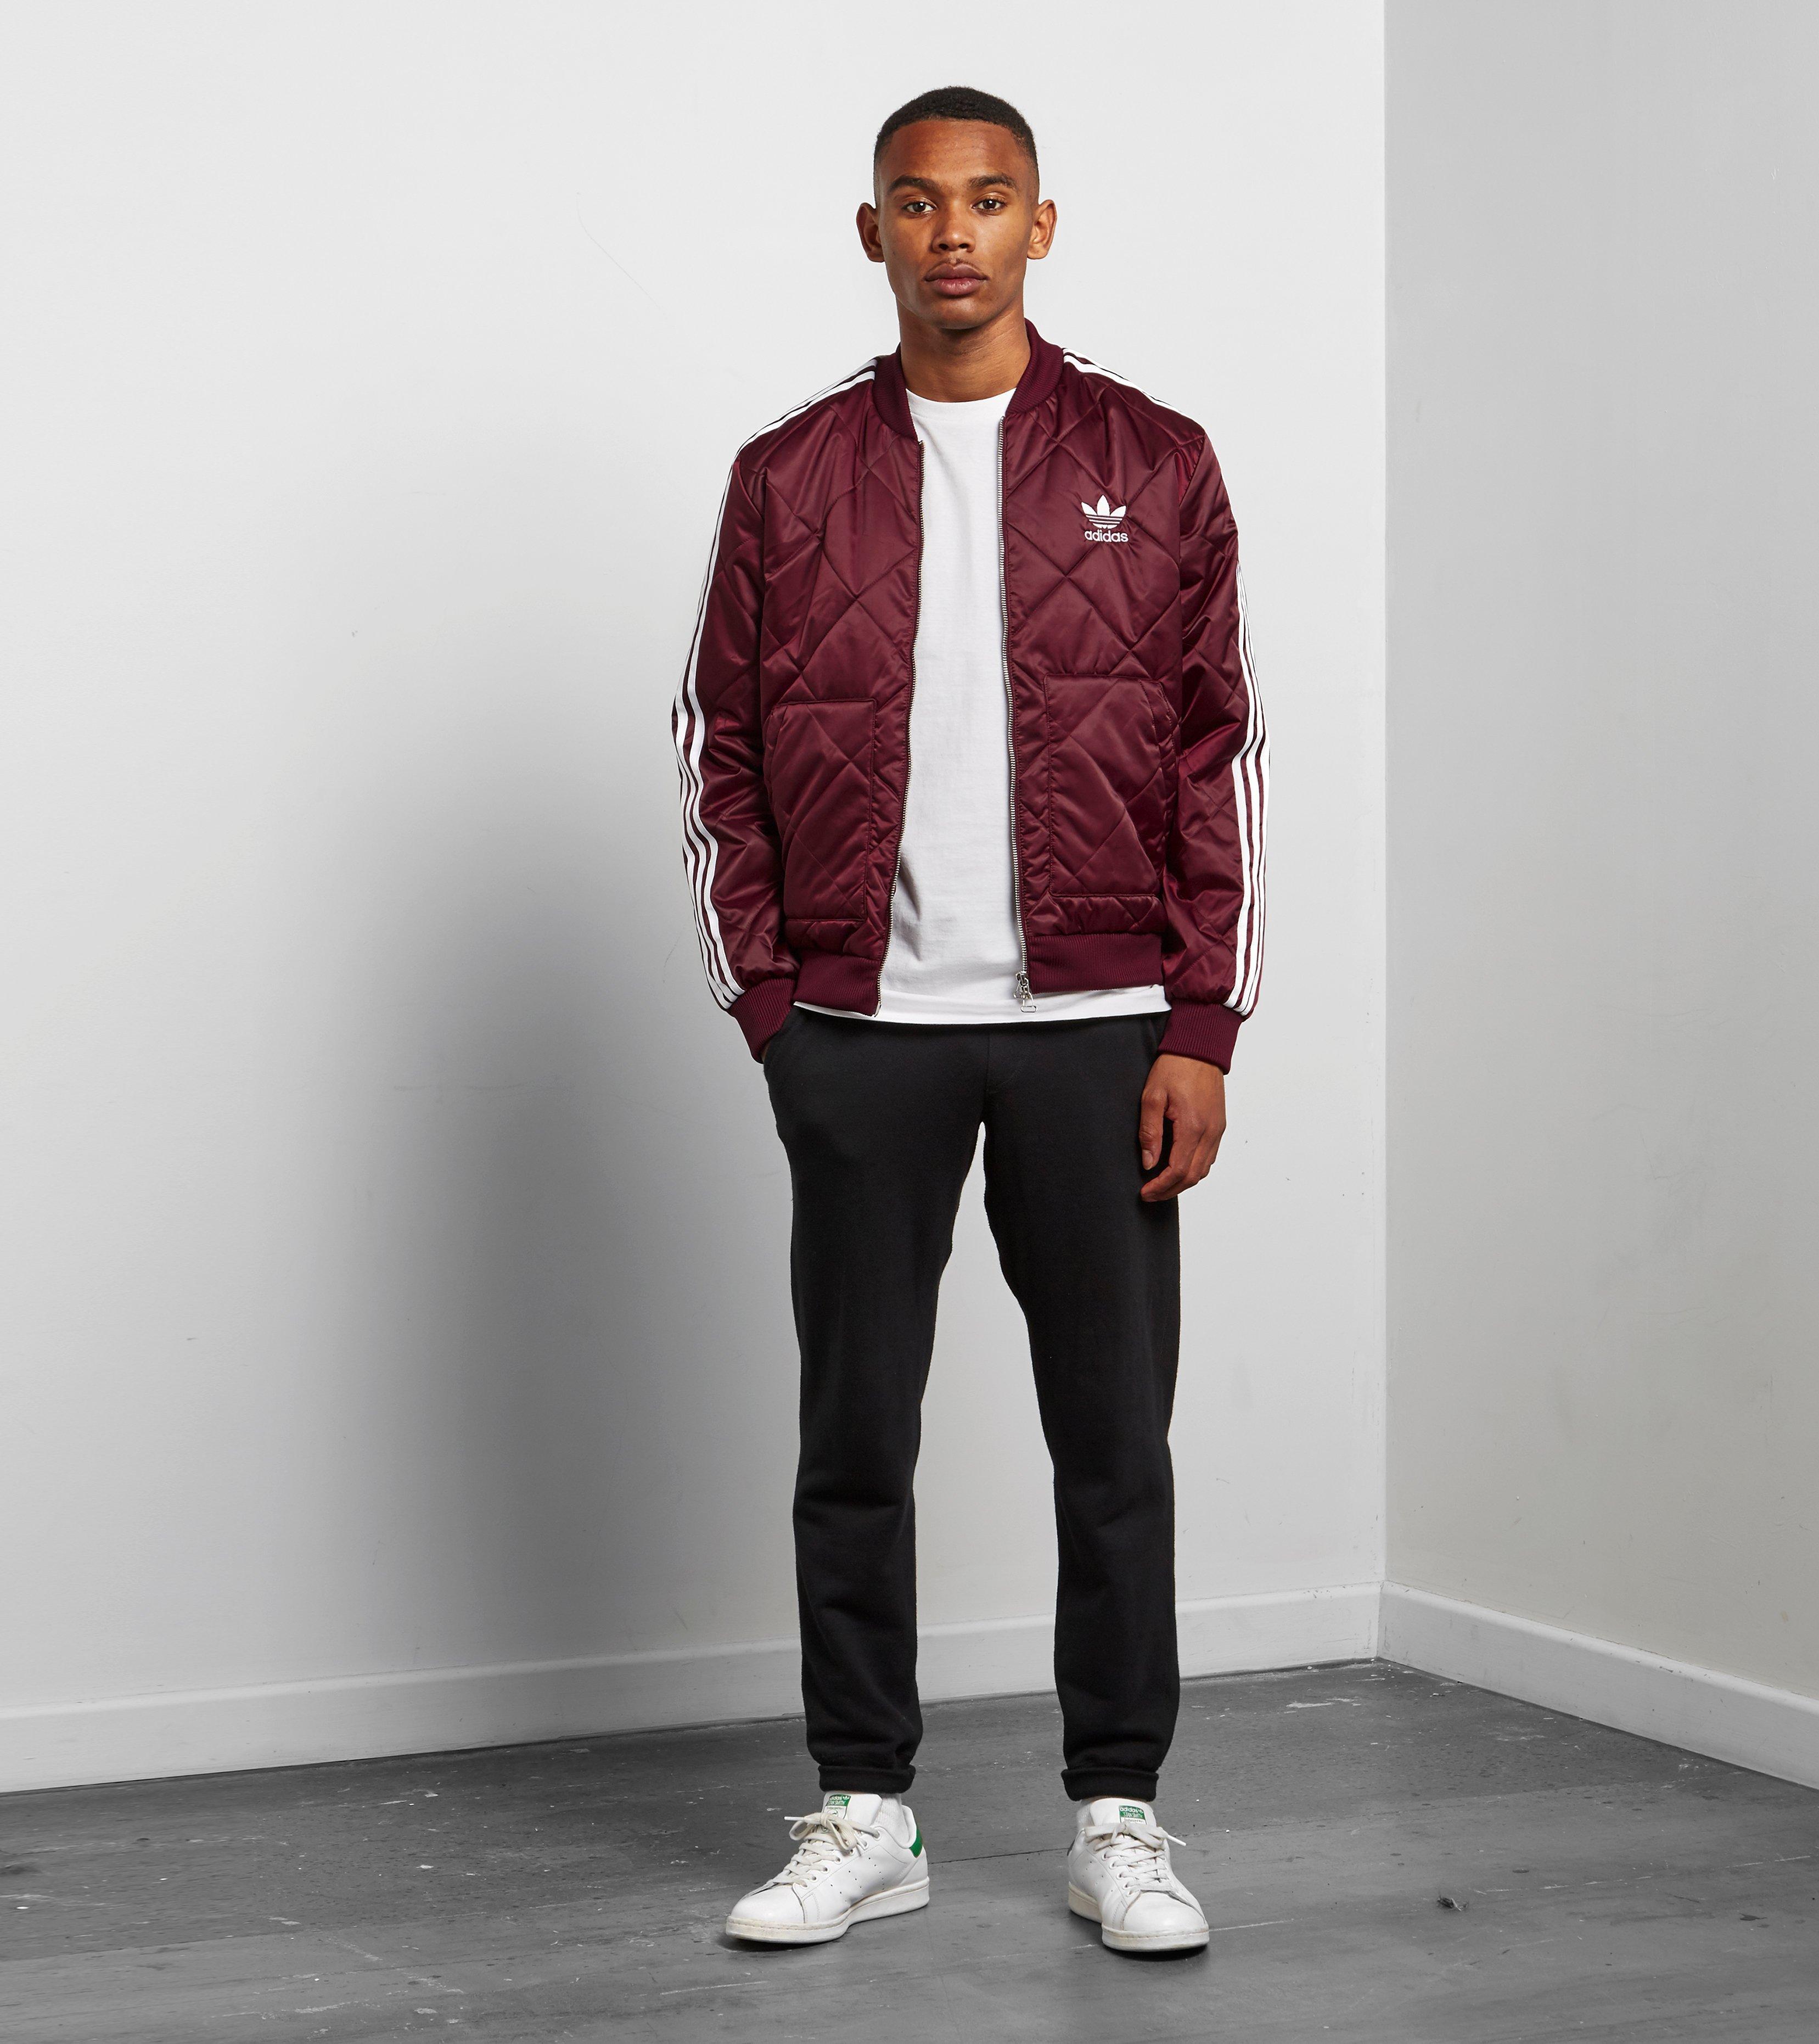 adidas superstar quilted jacket